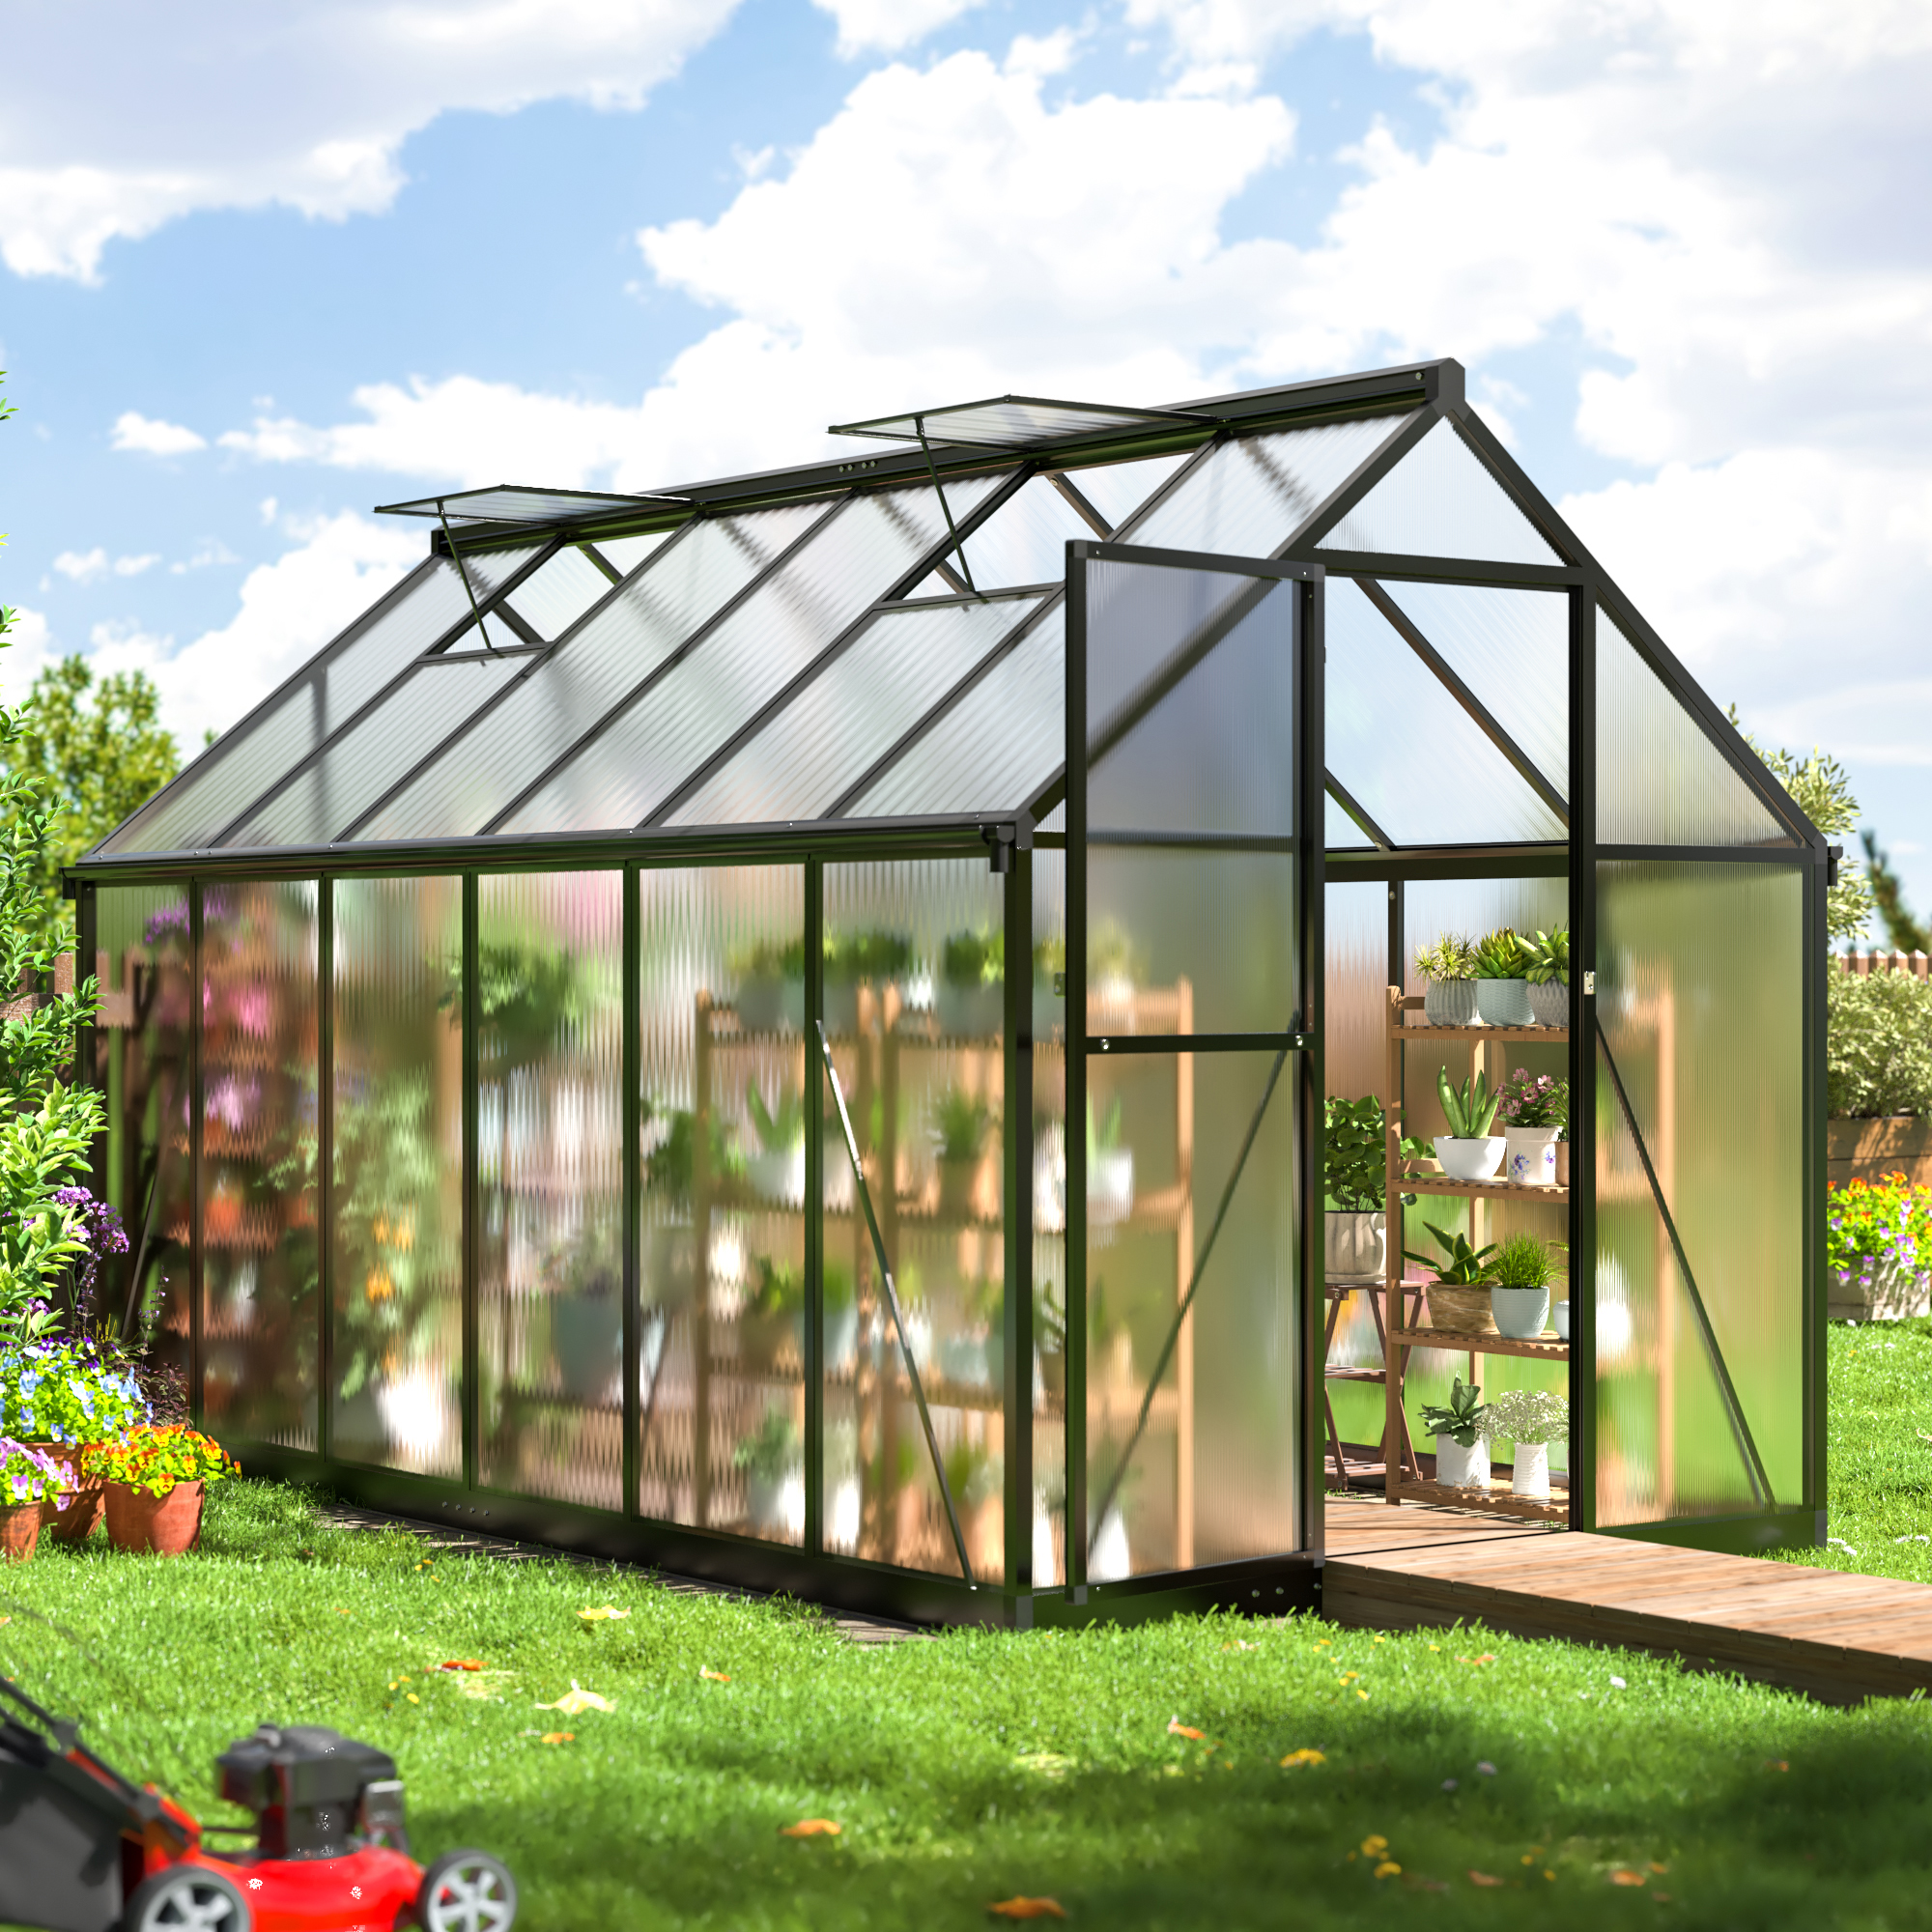 

Polar Aurora 6x7.5 Ft Greenhouse, Quick Assembly Structure Polycarbonate Greenhouse, Walk-in Greenhouses For Outdoors With Ventilated Windows, Green Houses For Outside Backyard Garden Grow Tent